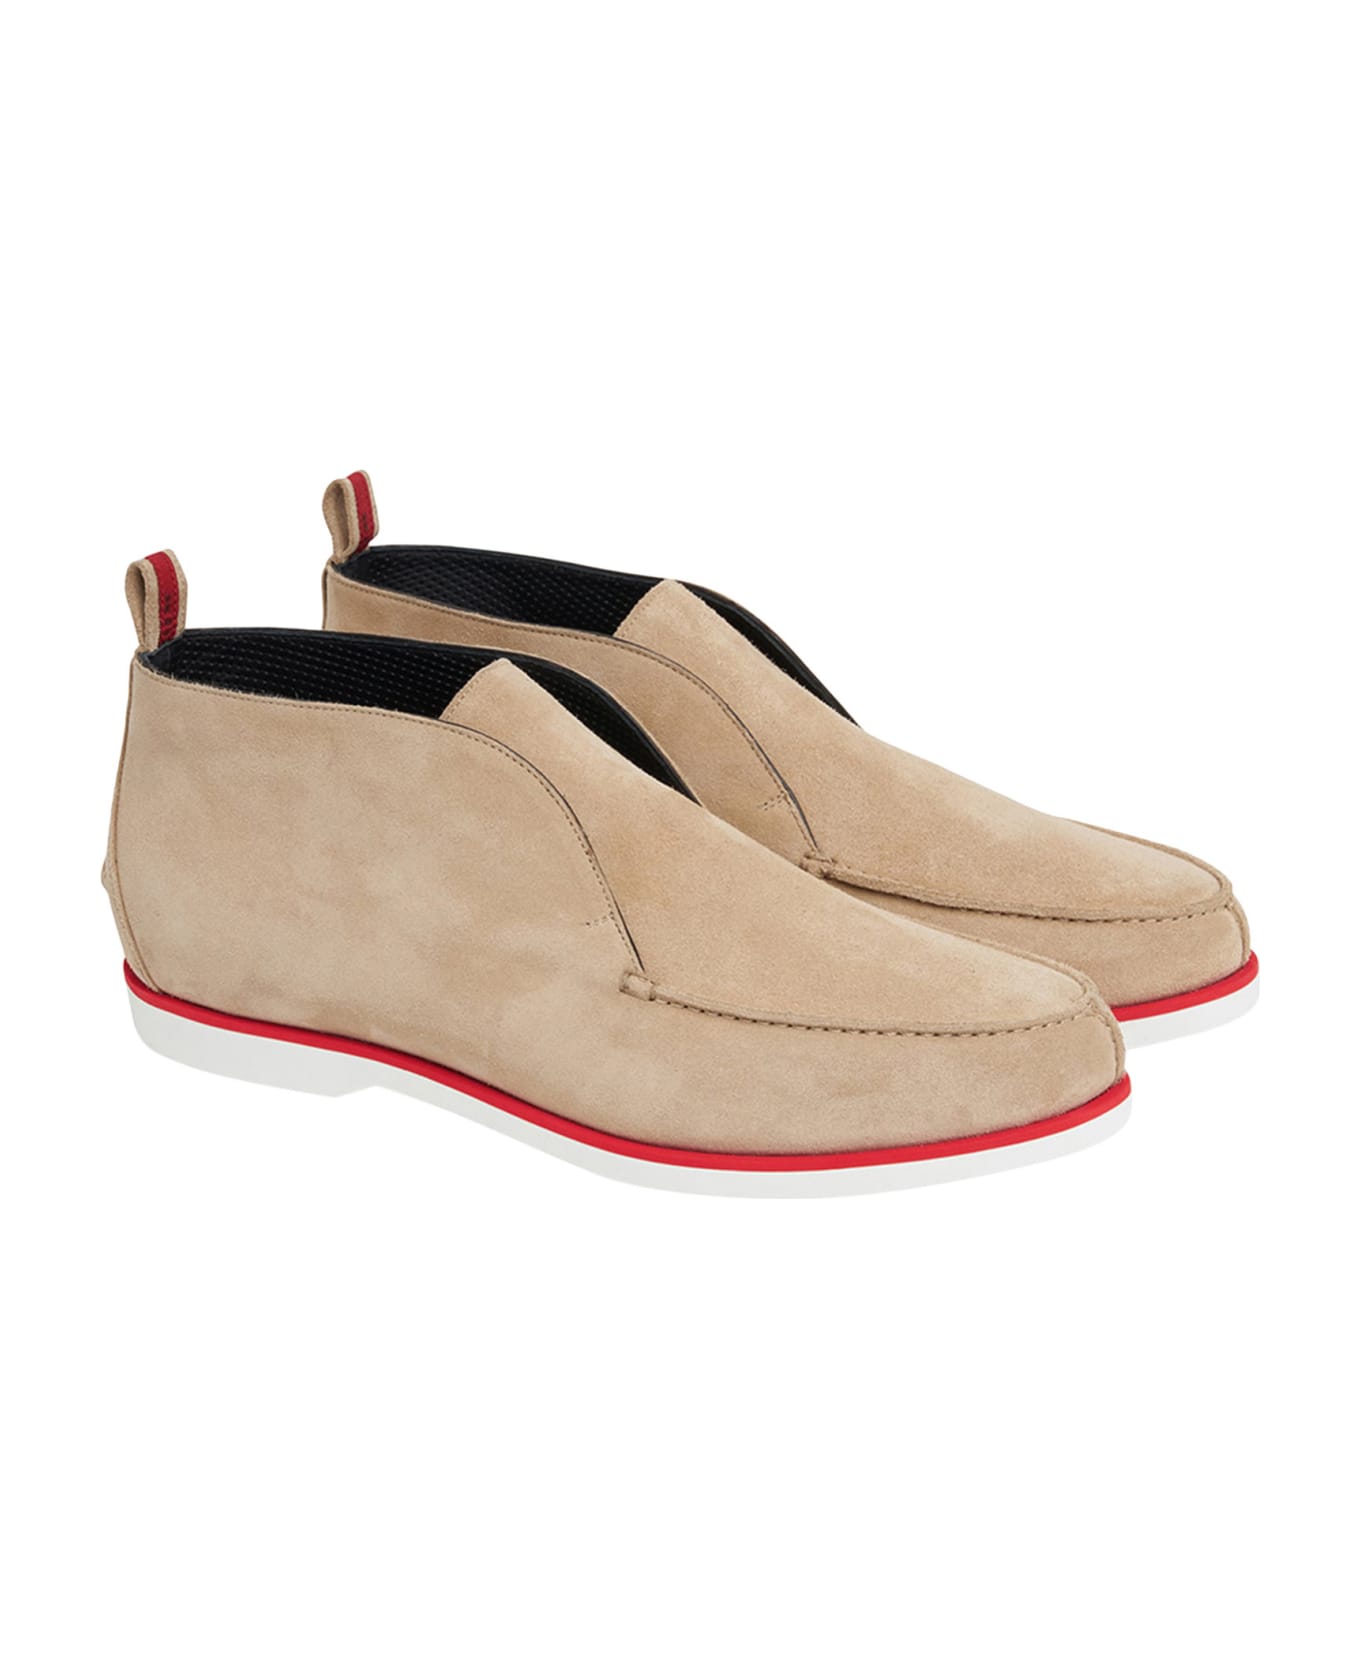 Kiton Ankle Shoes Calfskin - BEIGE